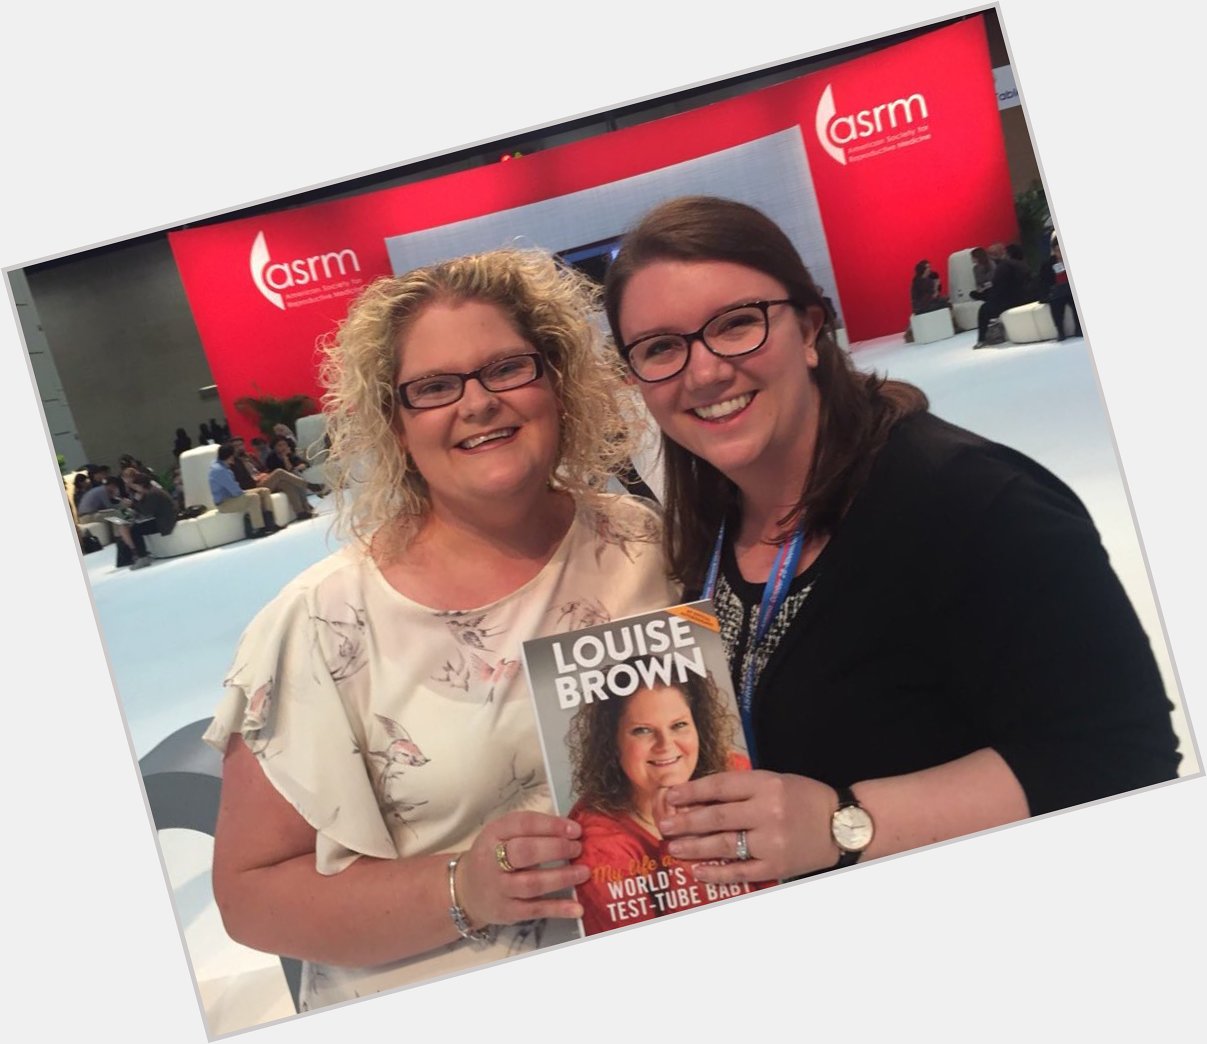 Happy birthday Louise Brown, the very first baby born via IVF! It was amazing meeting you in 2017 at ASRM. 